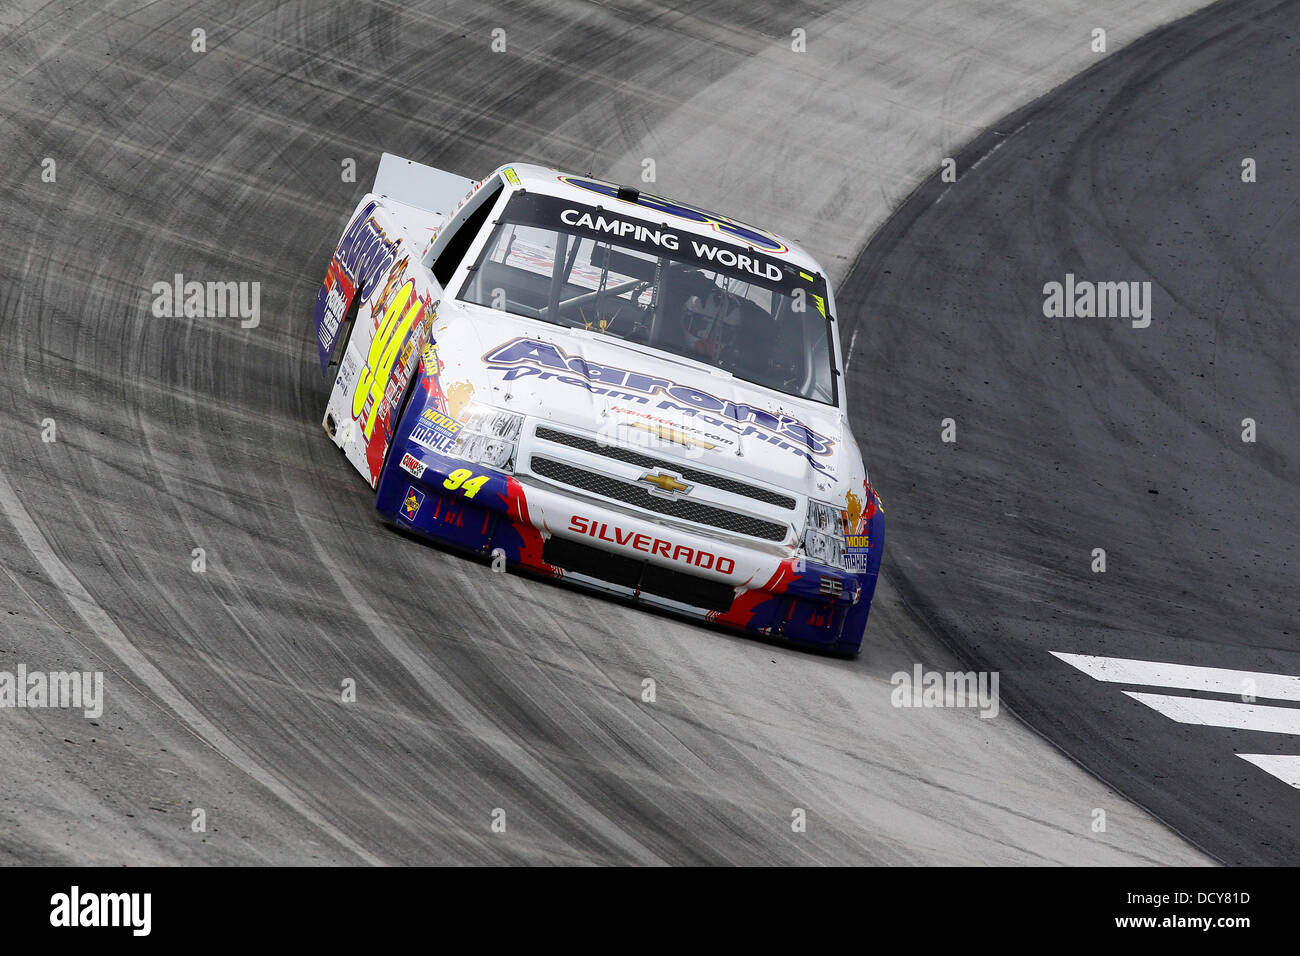 Bristol, TN, USA. 21st Aug, 2013. Bristol, TN - Aug 21, 2013: Chase Elliott (94) brings his Camping World Truck through the turns during a practice session for the UNOH 200 race at the Bristol Motor Speedway in Bristol, TN. Credit:  csm/Alamy Live News Stock Photo